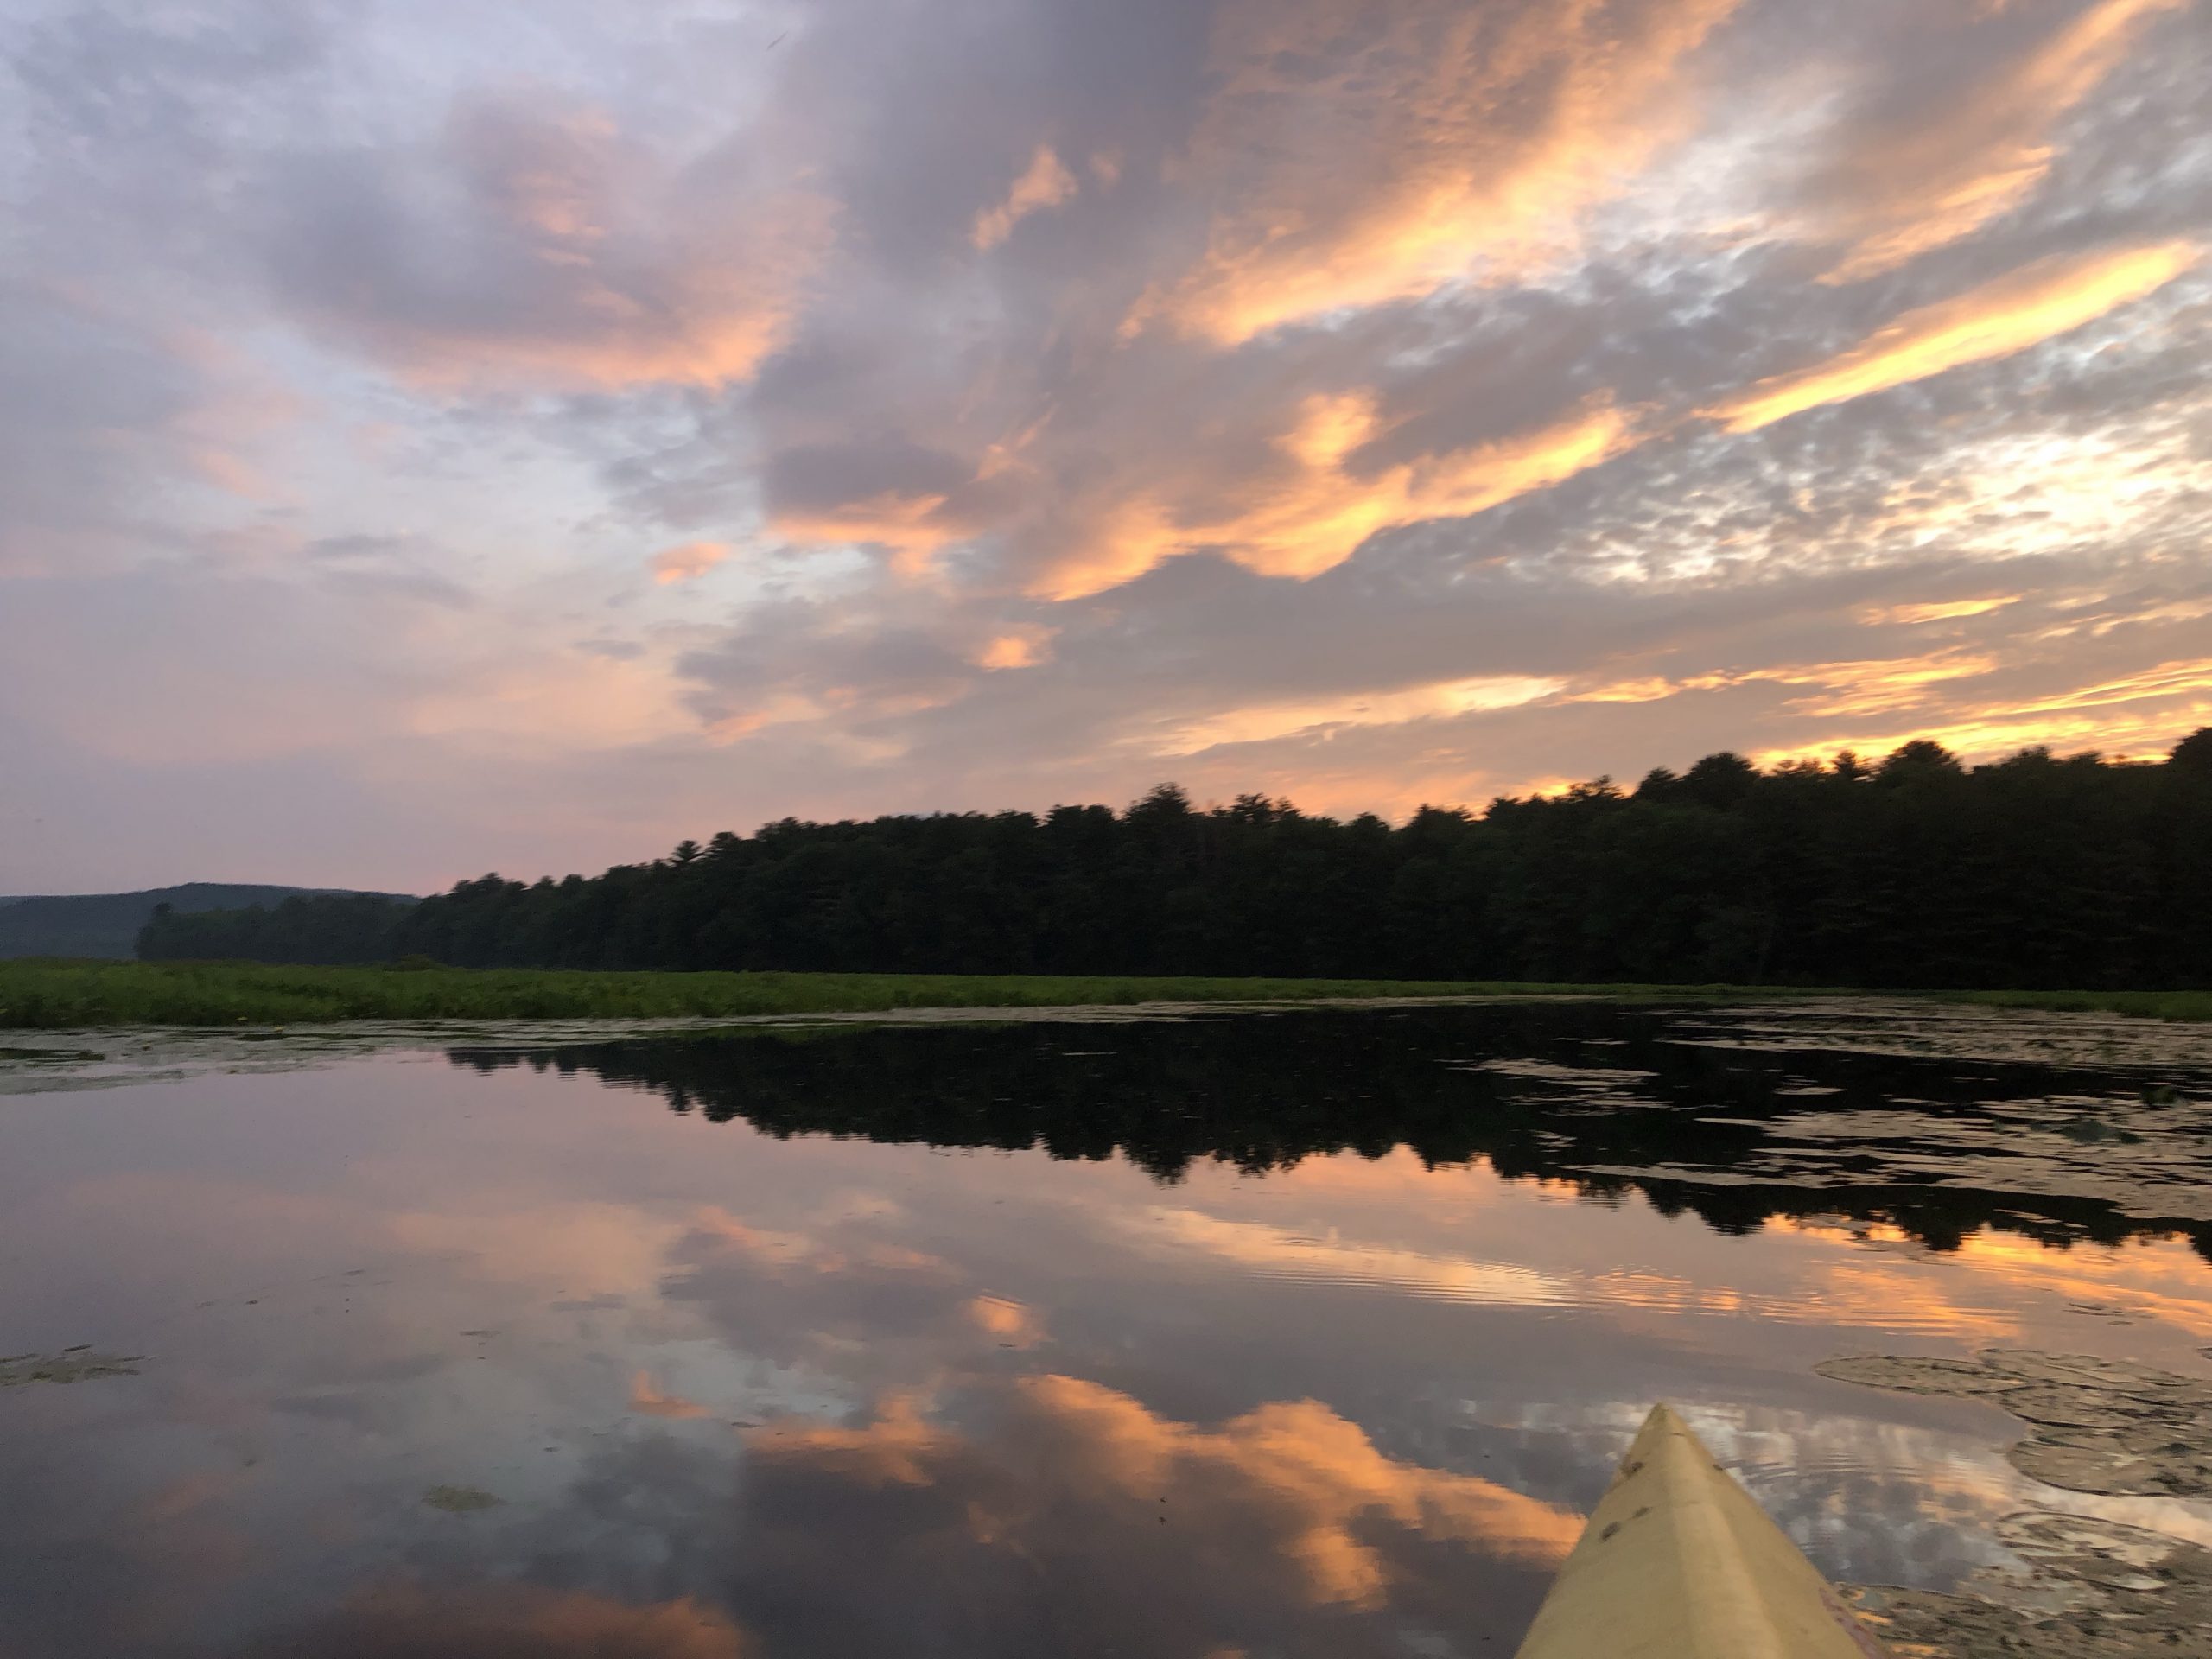 kayaking at night to catch the sunset